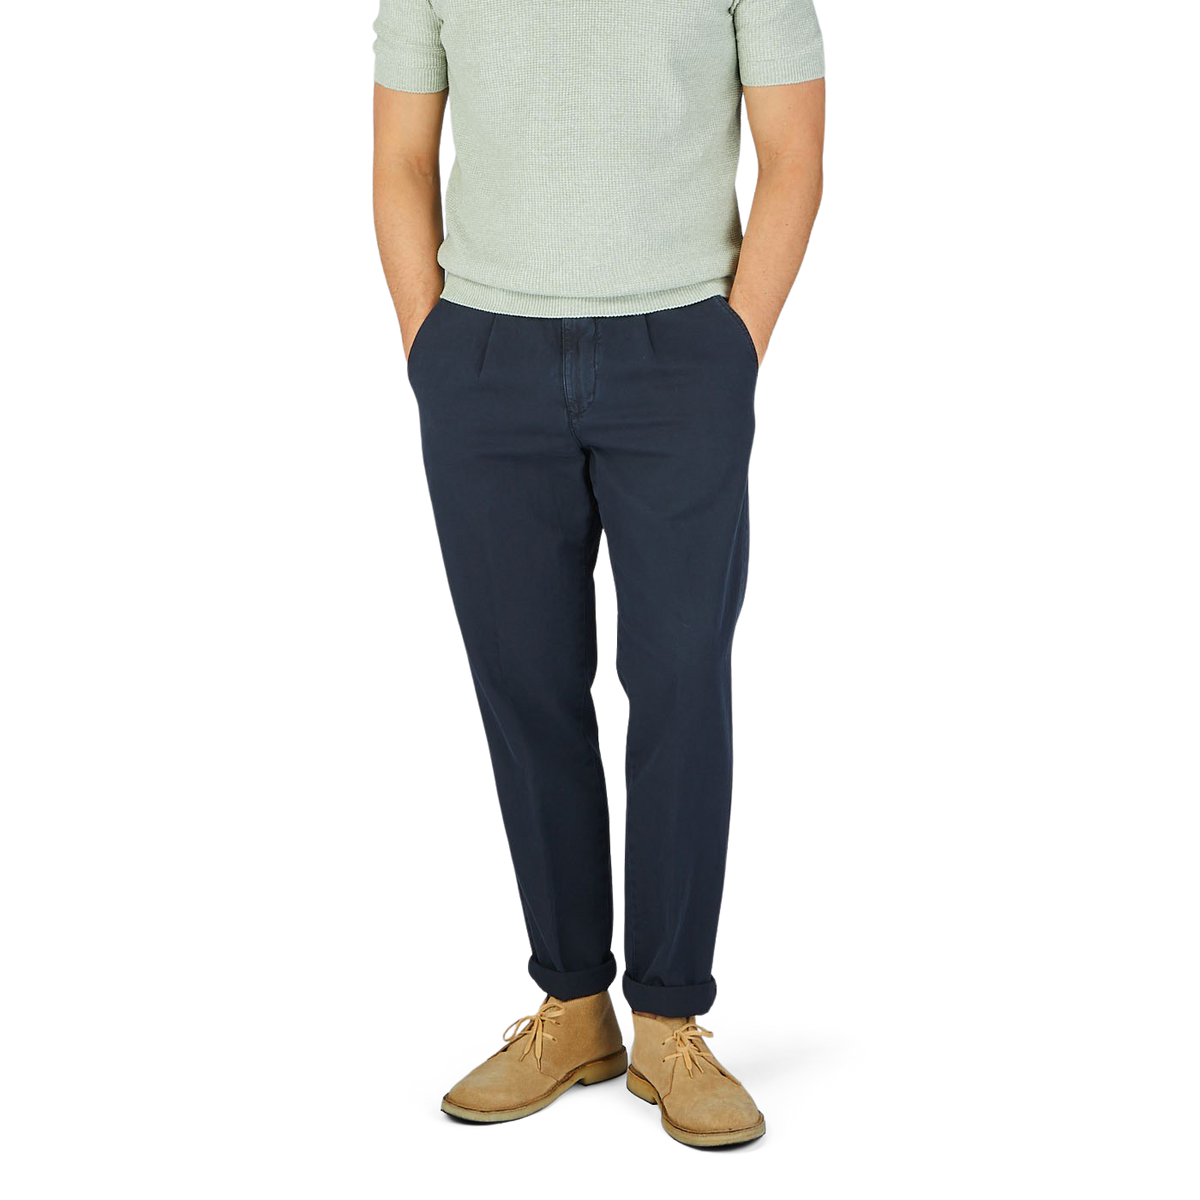 A man in Briglia navy blue cotton linen BG59 pleated chinos and a green t-shirt.